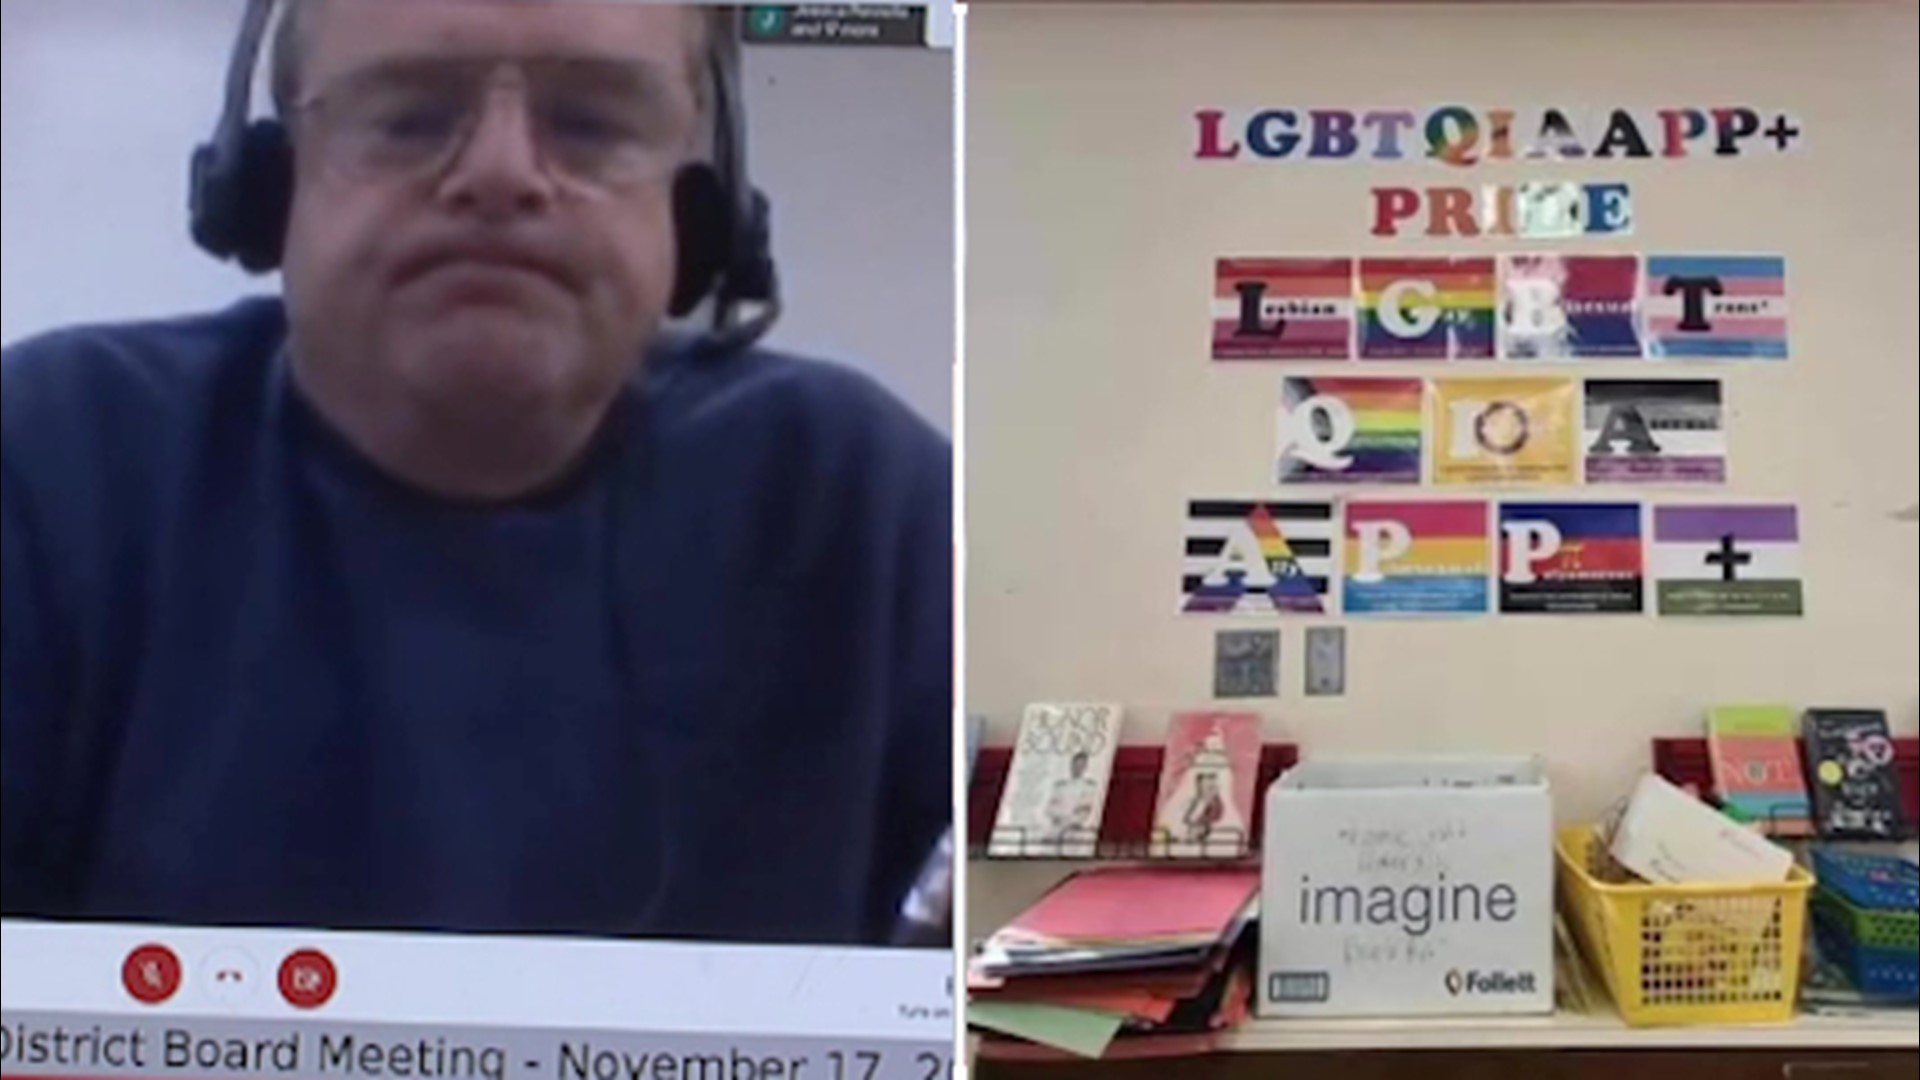 Earlier this month he condemned the school's Gay Pride display.